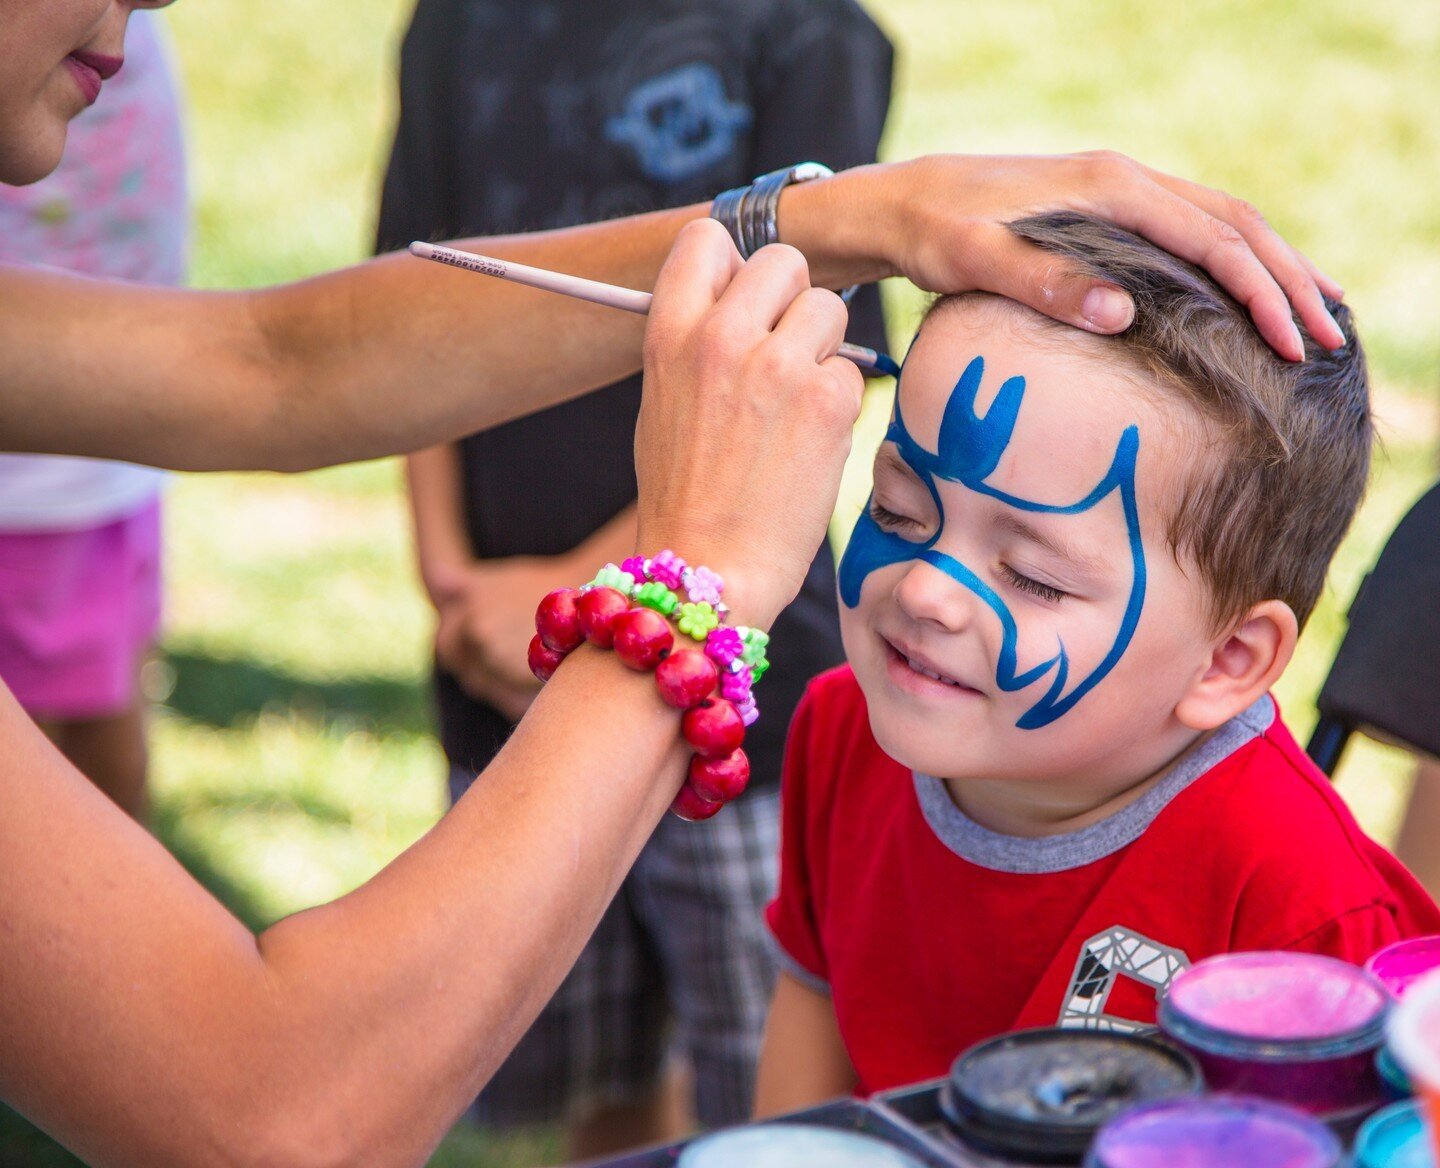 Batman, a tiger, or a butterfly? Get your favorite design painted on your face at The Sound&rsquo;s Sensory Sensitive 4th of July Celebration!

You won&rsquo;t want to miss out on THIS SUNDAY&rsquo;s big Independence Day Celebration from 6 -10 PM. It